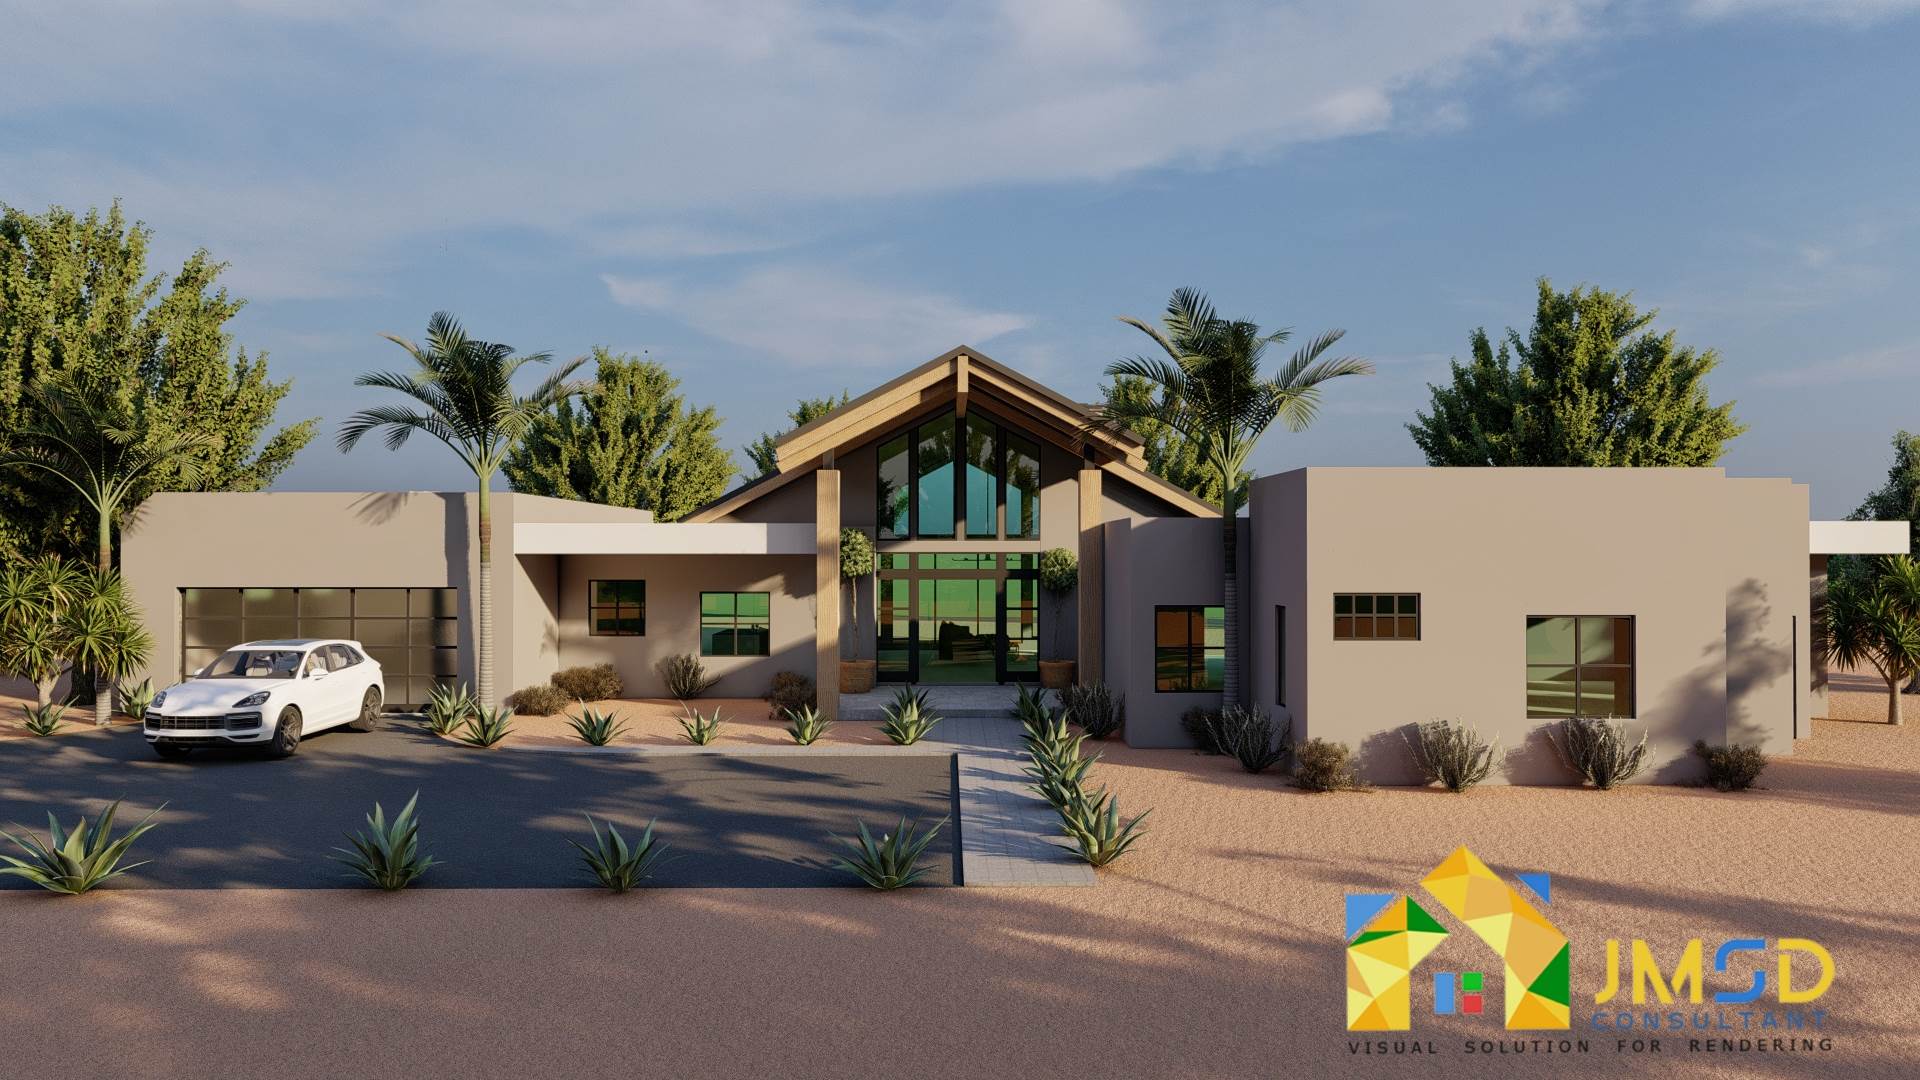 3D House Exterior Rendering Services Phoenix Arizona JMSD Consultant is an architectural visualization studio that produces high quality 3D Rendering Services Phoenix Arizona and all the United States. Our 3D artists have more than 10 years of experience in the architectural visualization industry. by JMSDCONSULTANT